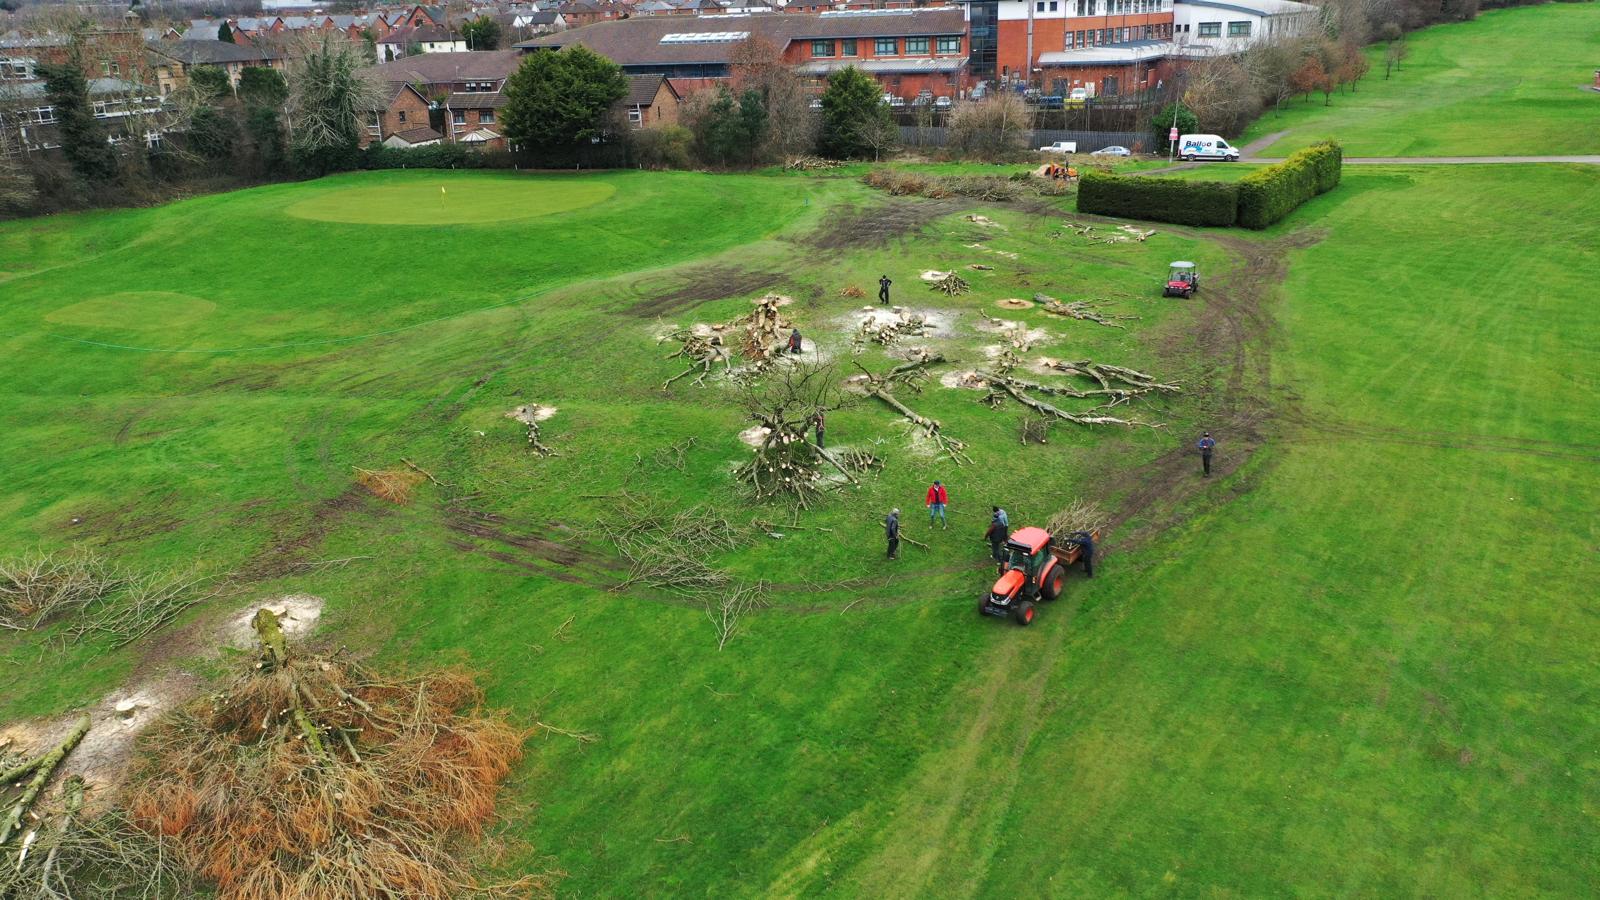 TREES CUT DOWN: The work at Cliftonville Golf Club on Wednesday morning